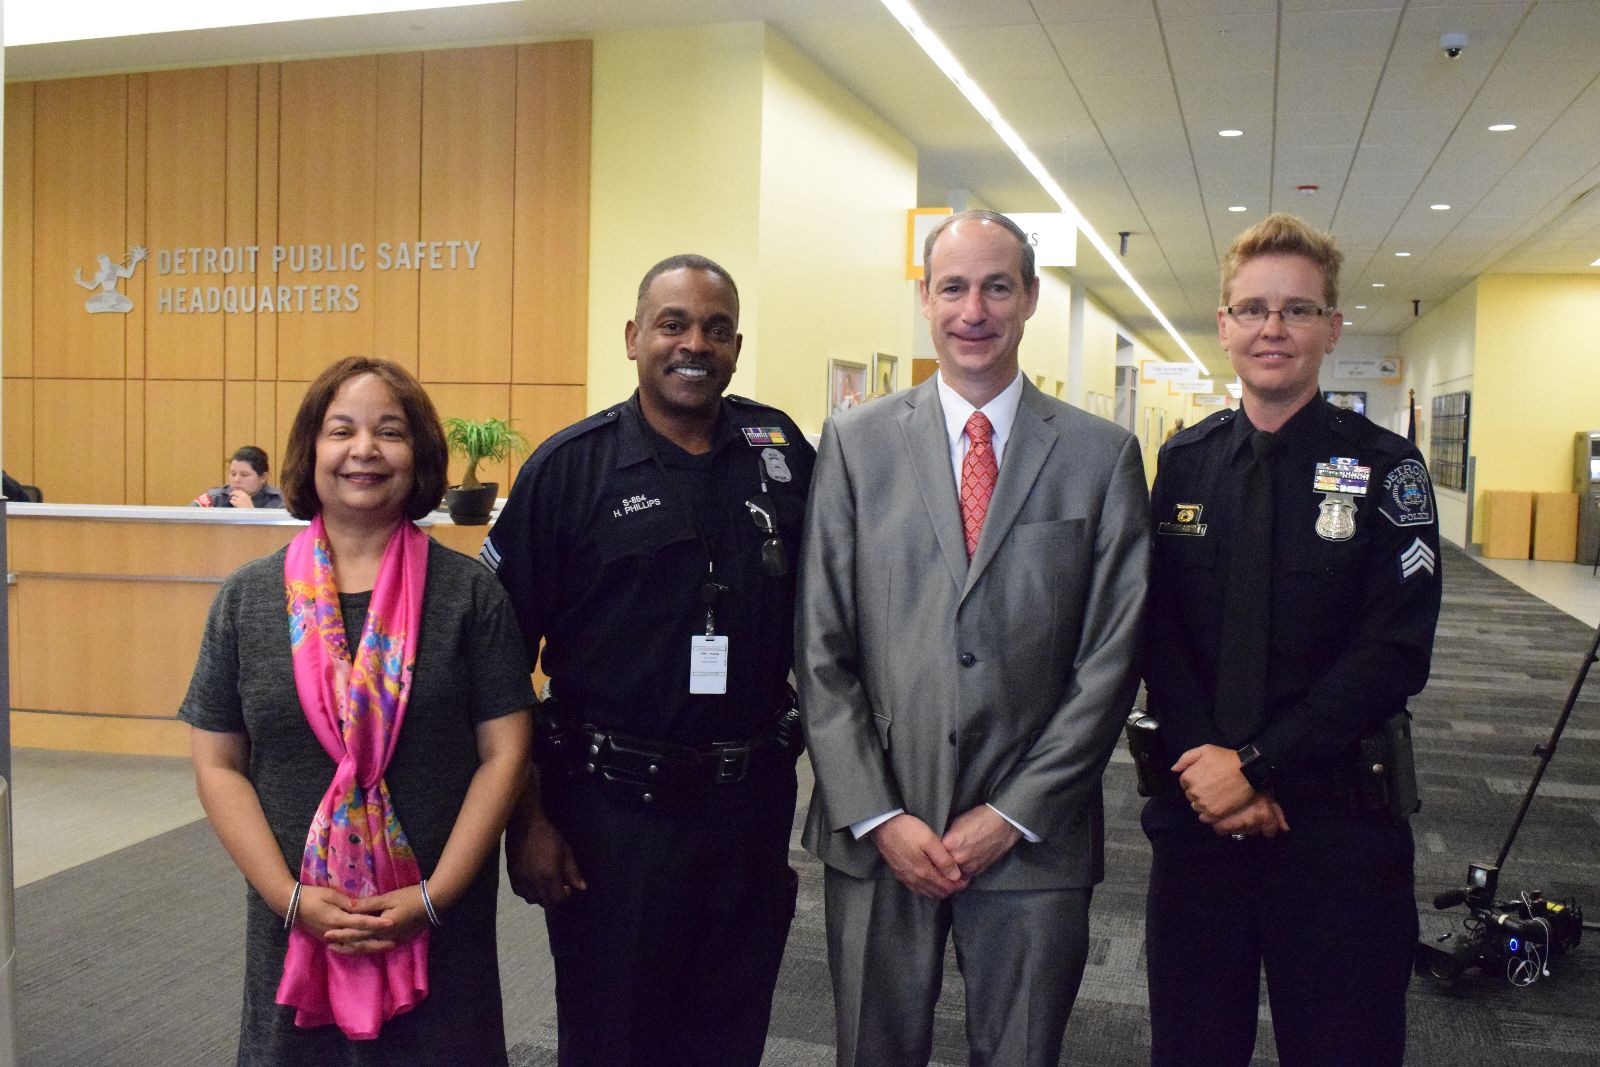 Associate Provost and Dean of Wayne State's Graduate School, Ambika Mathur, DPD Sergeant Howard Phillips, College of Liberal Arts and Sciences Dean Wayne M. Raskind, DPD Sergeant Dawn Engel.